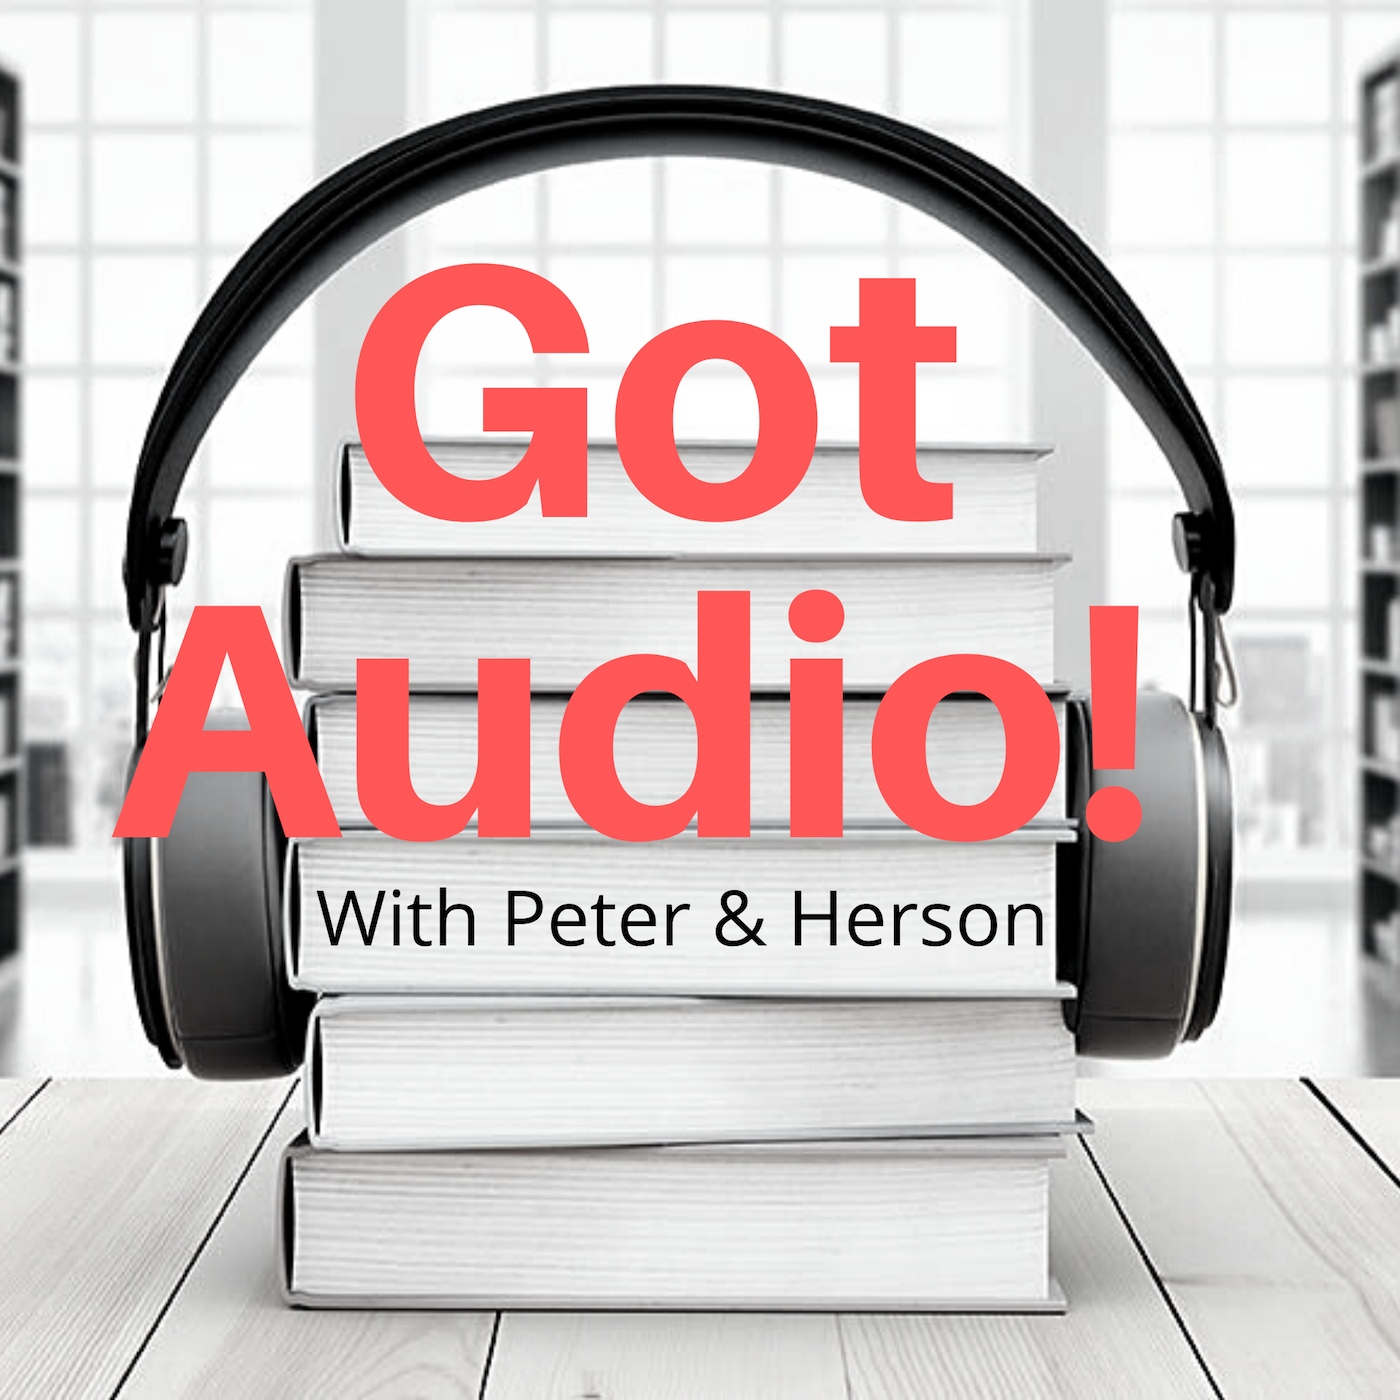 Got Audio! With Peter & Herson